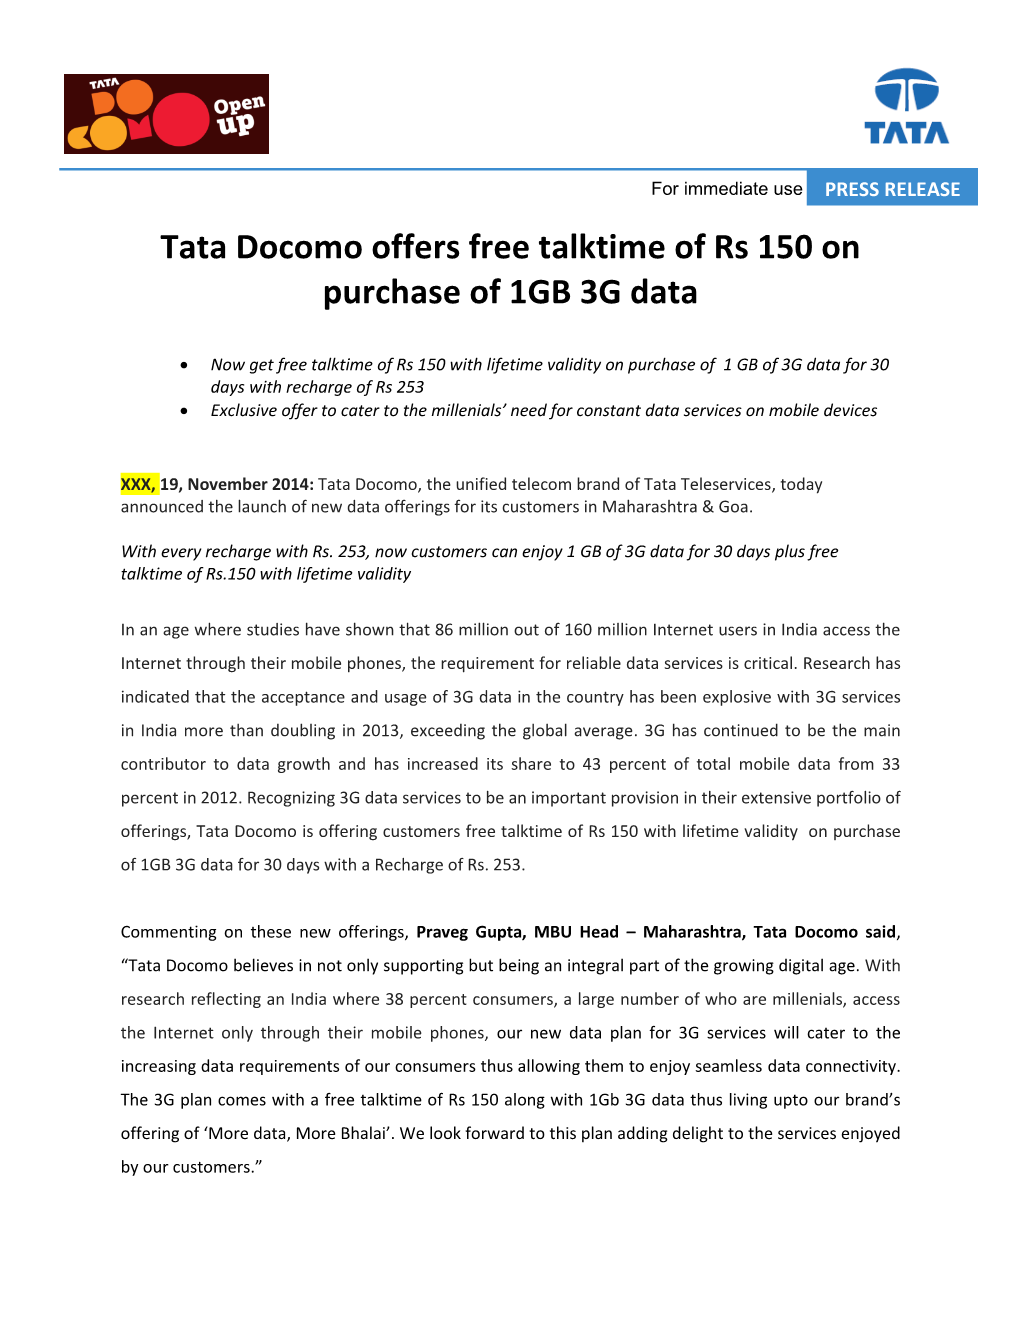 Tata Docomo Offers Free Talktime of Rs 150 on Purchase of 1GB 3G Data